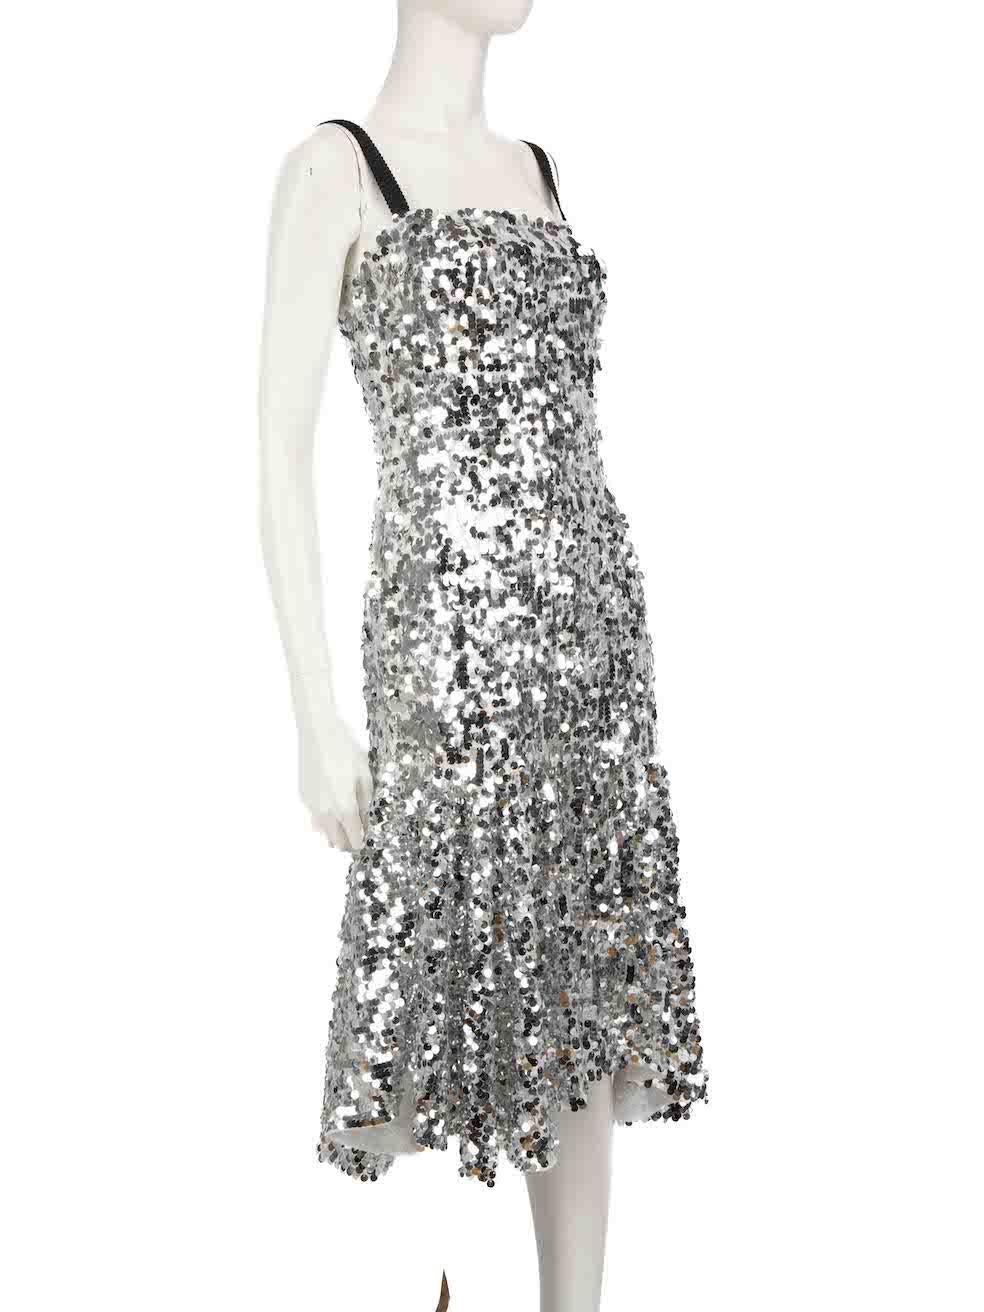 CONDITION is Very good. Hardly any visible wear to dress is evident on this used Dolce & Gabbana designer resale item. This item is missing the size label.
 
 
 
 Details
 
 
 Silver
 
 Polyester
 
 Dress
 
 Sequinned
 
 Midi
 
 Sleeveless
 
 Square